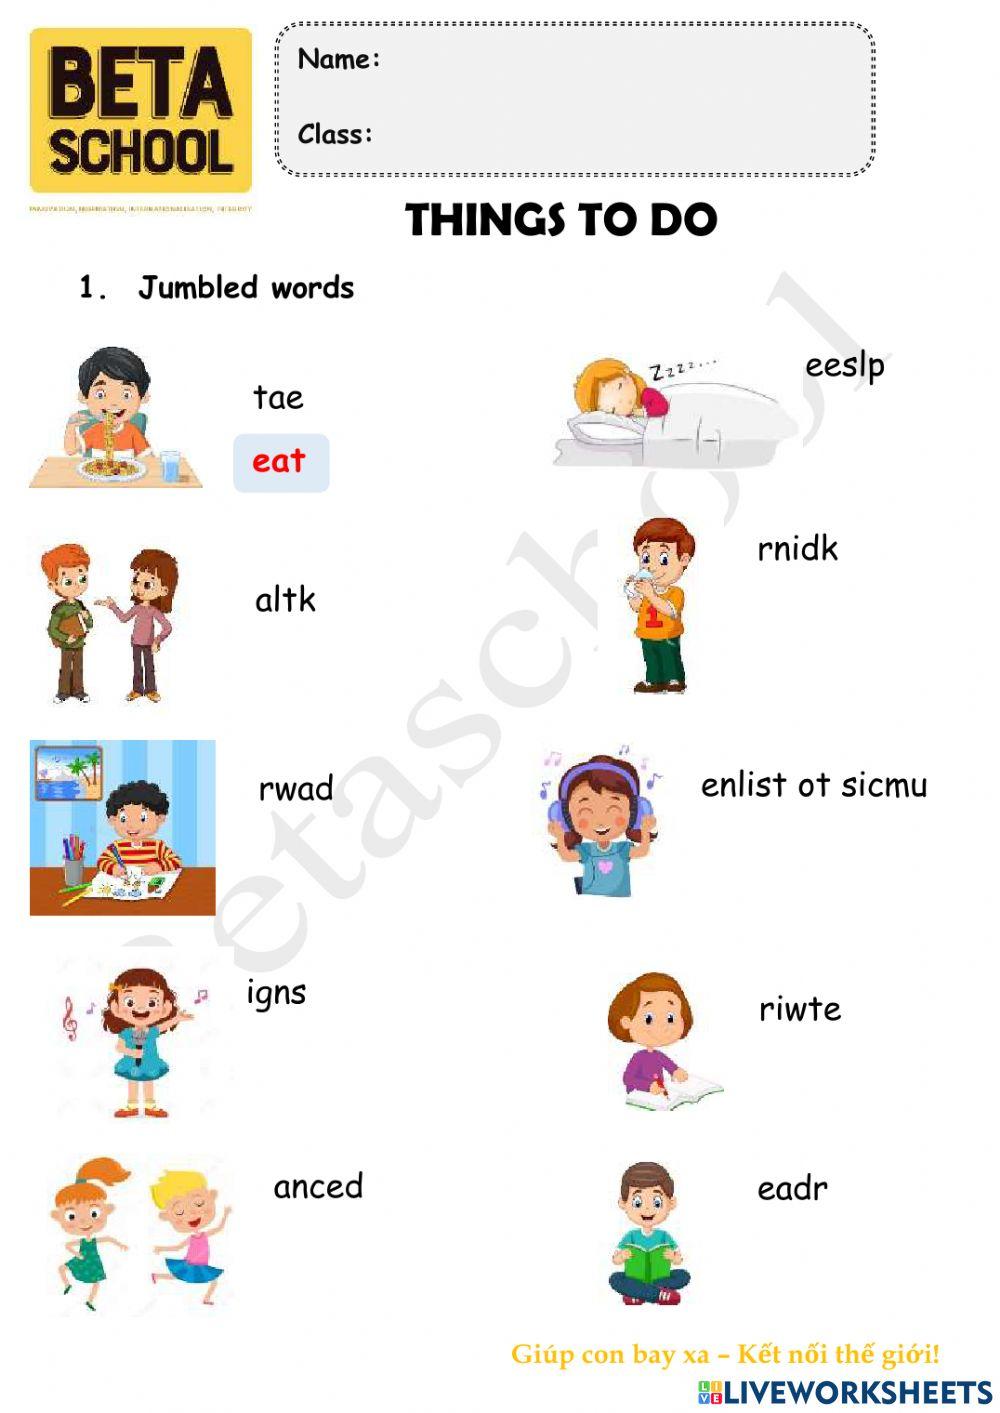 Things to do - BE1A